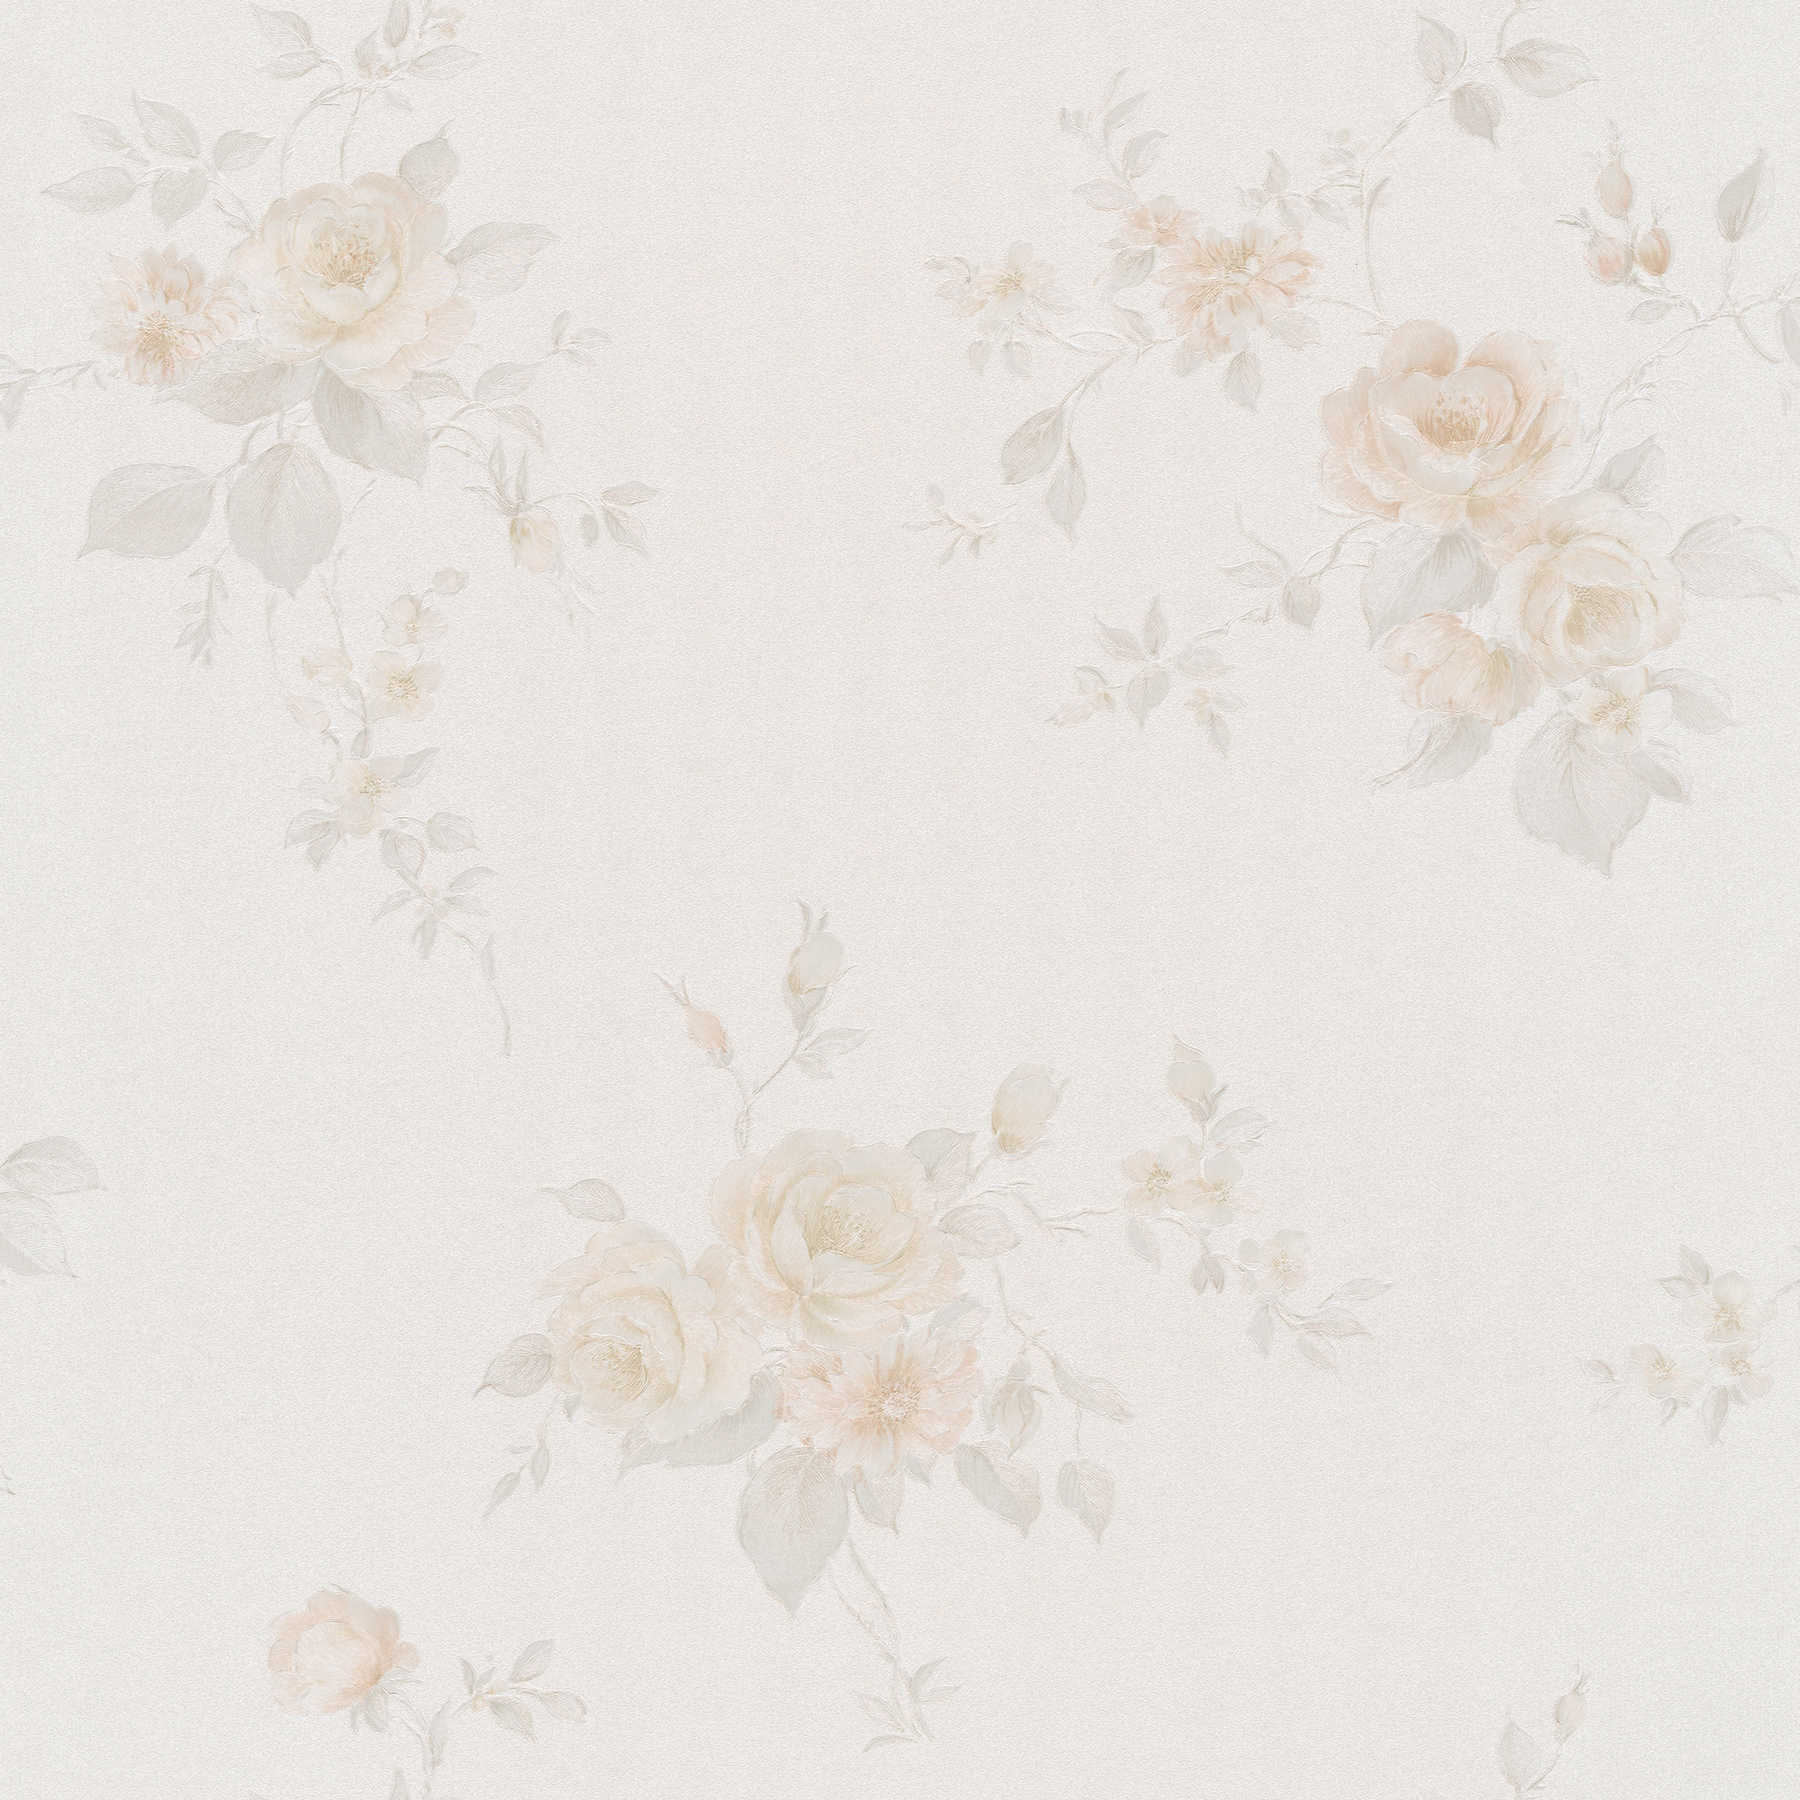 Roses wallpaper floral pattern in country style - cream
